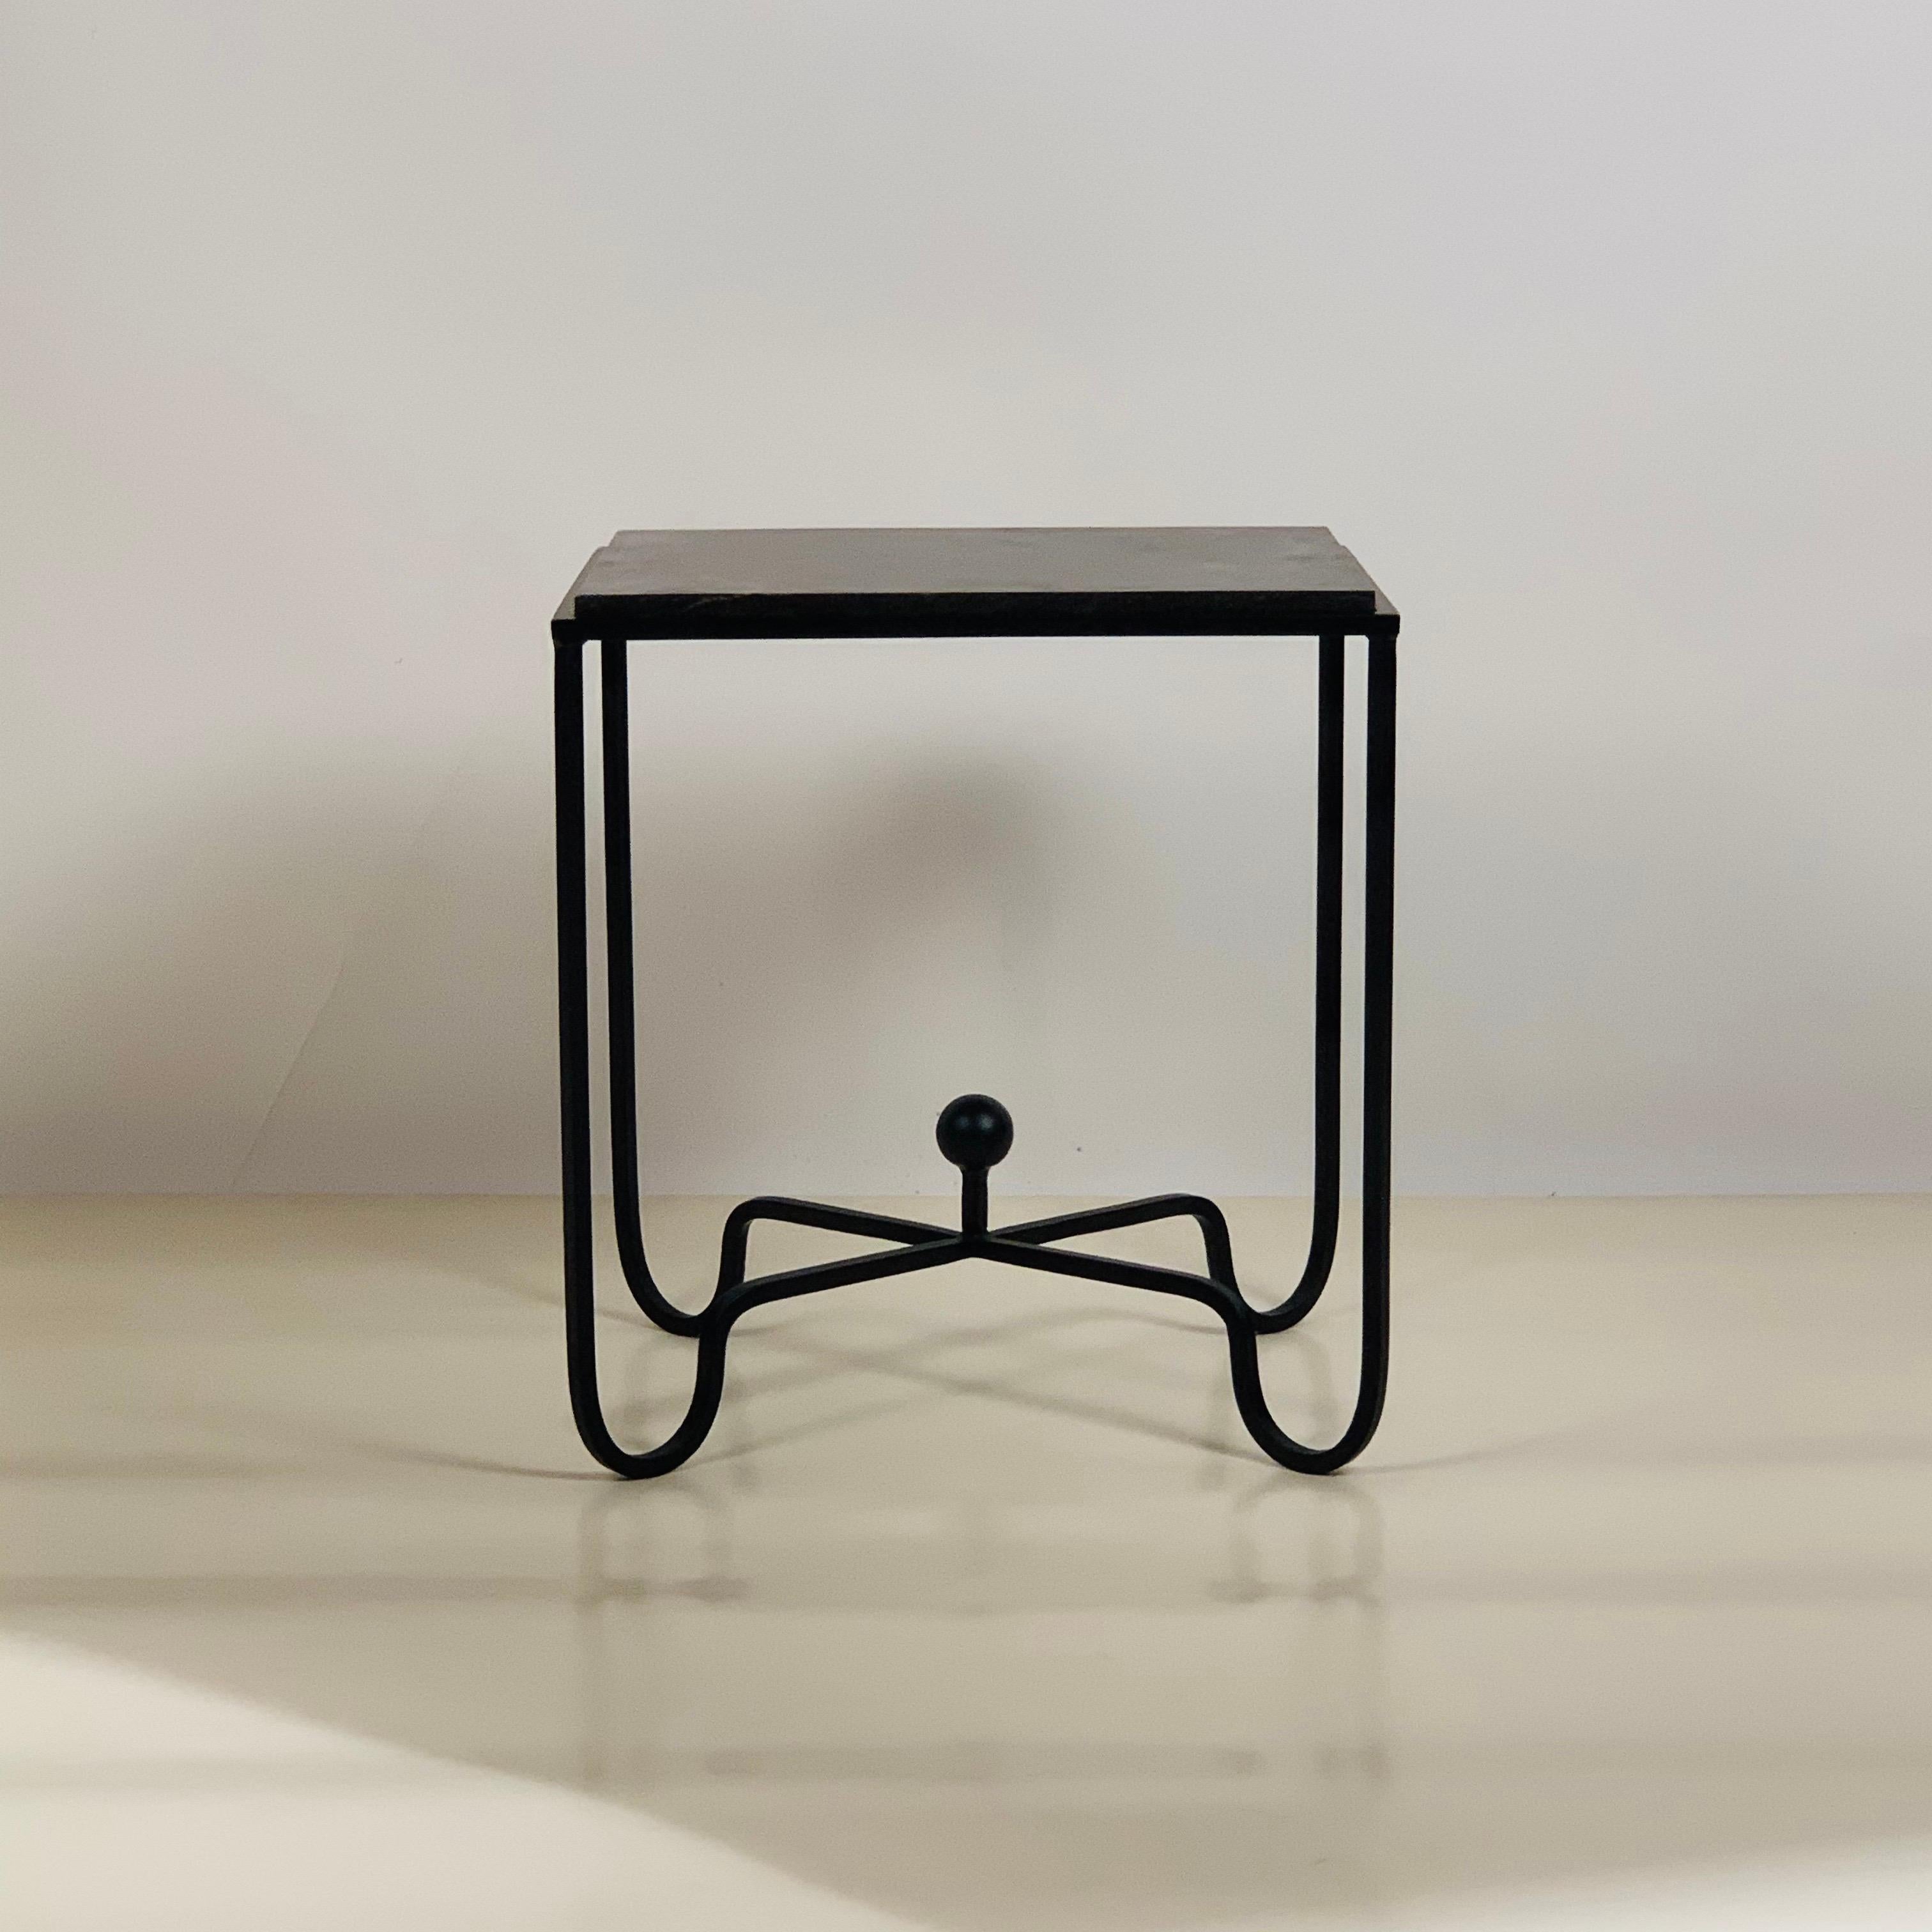 Sculptural blackened steel frames fitted with gorgeous black limestone tops. Very durable stone surface.

Inspired by the timeless aesthetic of French modern design, these night stands / side tables / end tables from our exclusive Design Frères